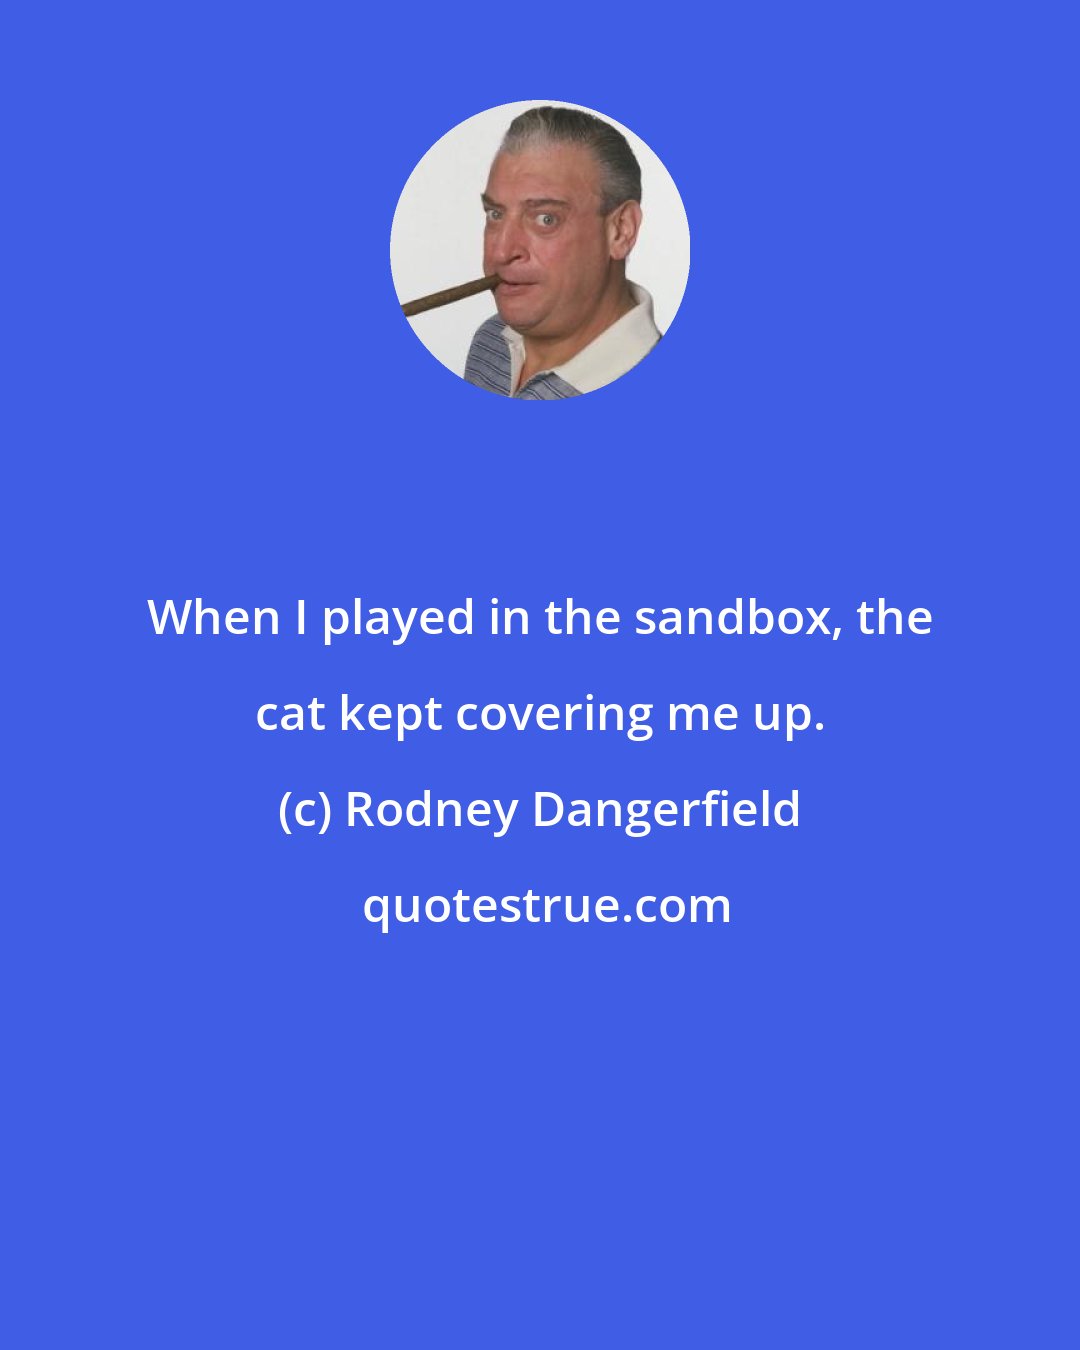 Rodney Dangerfield: When I played in the sandbox, the cat kept covering me up.